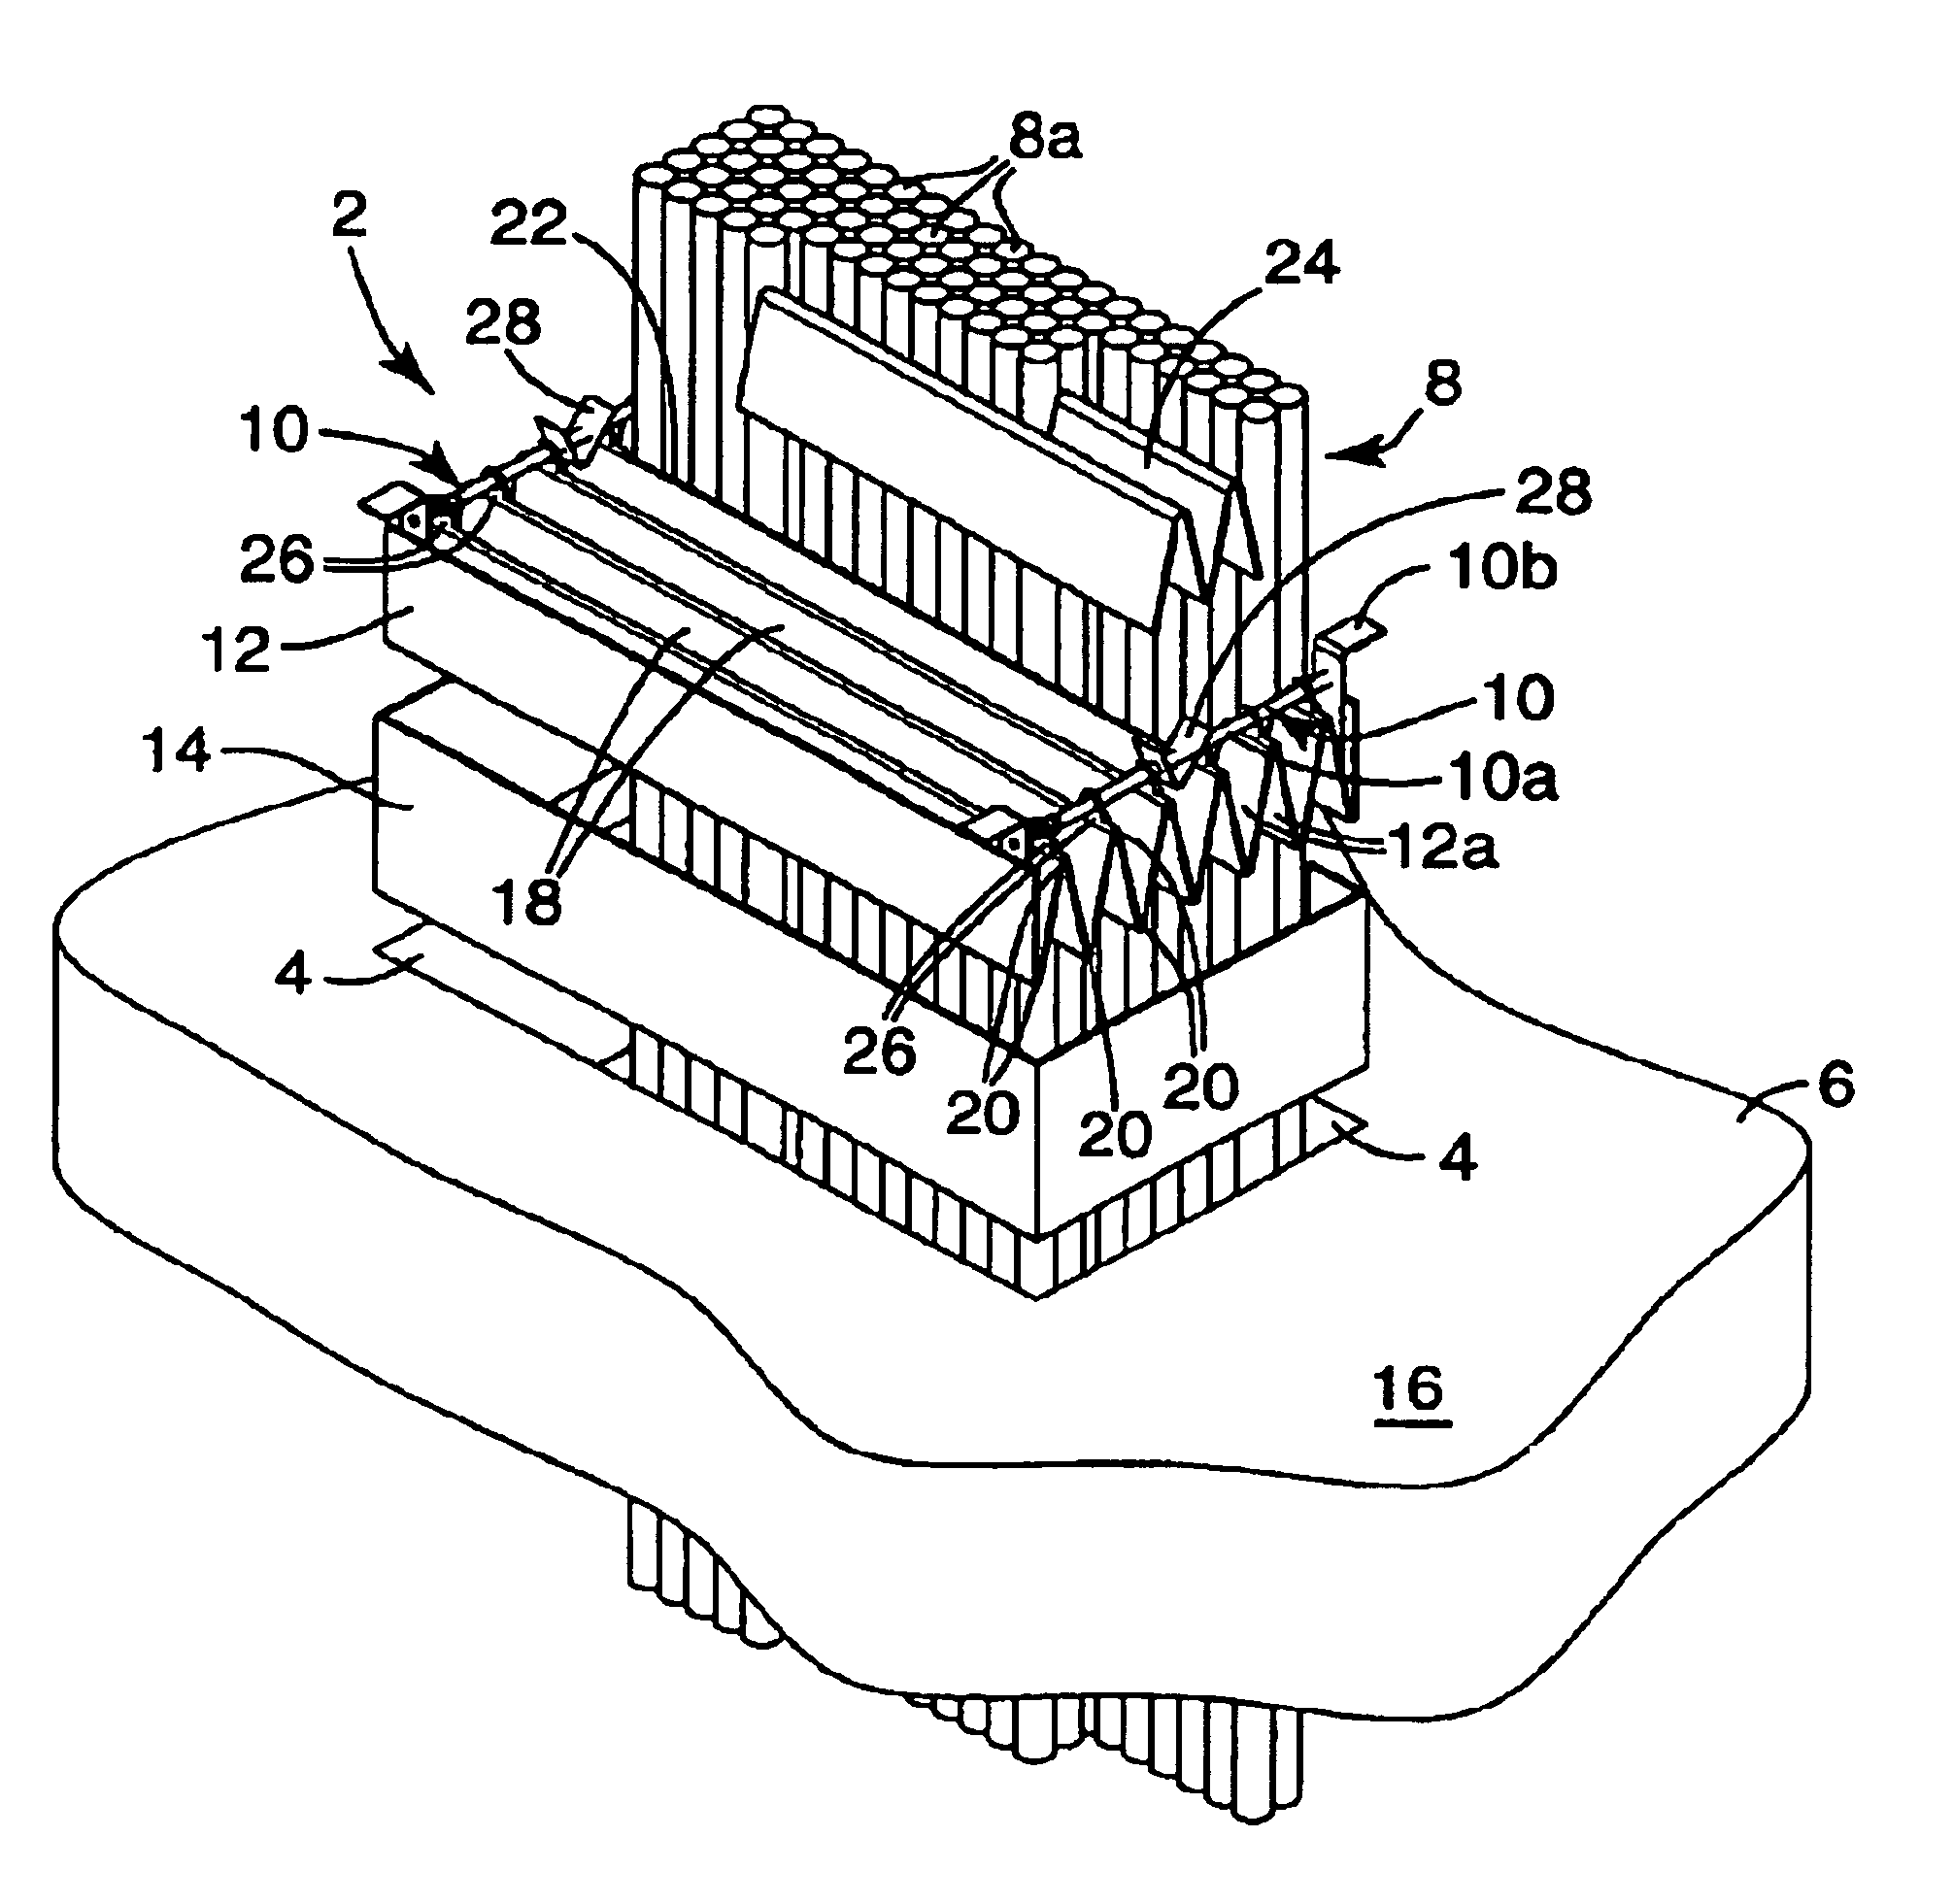 Method and apparatus for firestopping a through-penetration